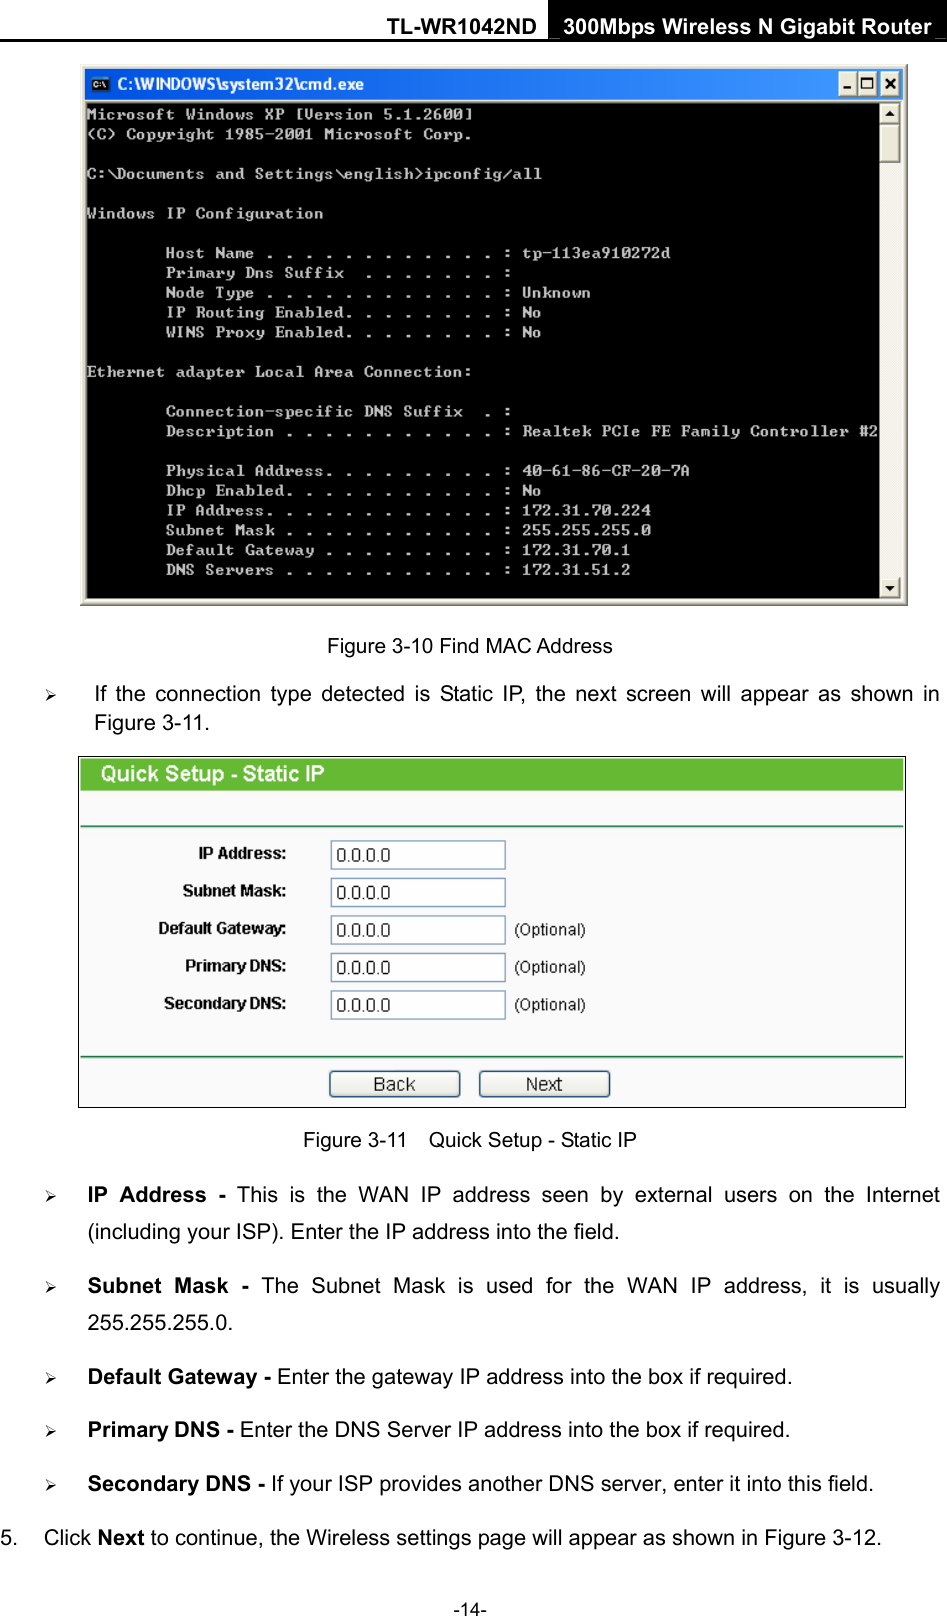 TL-WR1042ND 300Mbps Wireless N Gigabit Router -14-  Figure 3-10 Find MAC Address ¾ If the connection type detected is Static IP, the next screen will appear as shown in Figure 3-11.    Figure 3-11    Quick Setup - Static IP ¾ IP Address - This is the WAN IP address seen by external users on the Internet (including your ISP). Enter the IP address into the field. ¾ Subnet Mask - The Subnet Mask is used for the WAN IP address, it is usually 255.255.255.0. ¾ Default Gateway - Enter the gateway IP address into the box if required. ¾ Primary DNS - Enter the DNS Server IP address into the box if required. ¾ Secondary DNS - If your ISP provides another DNS server, enter it into this field. 5. Click Next to continue, the Wireless settings page will appear as shown in Figure 3-12. 